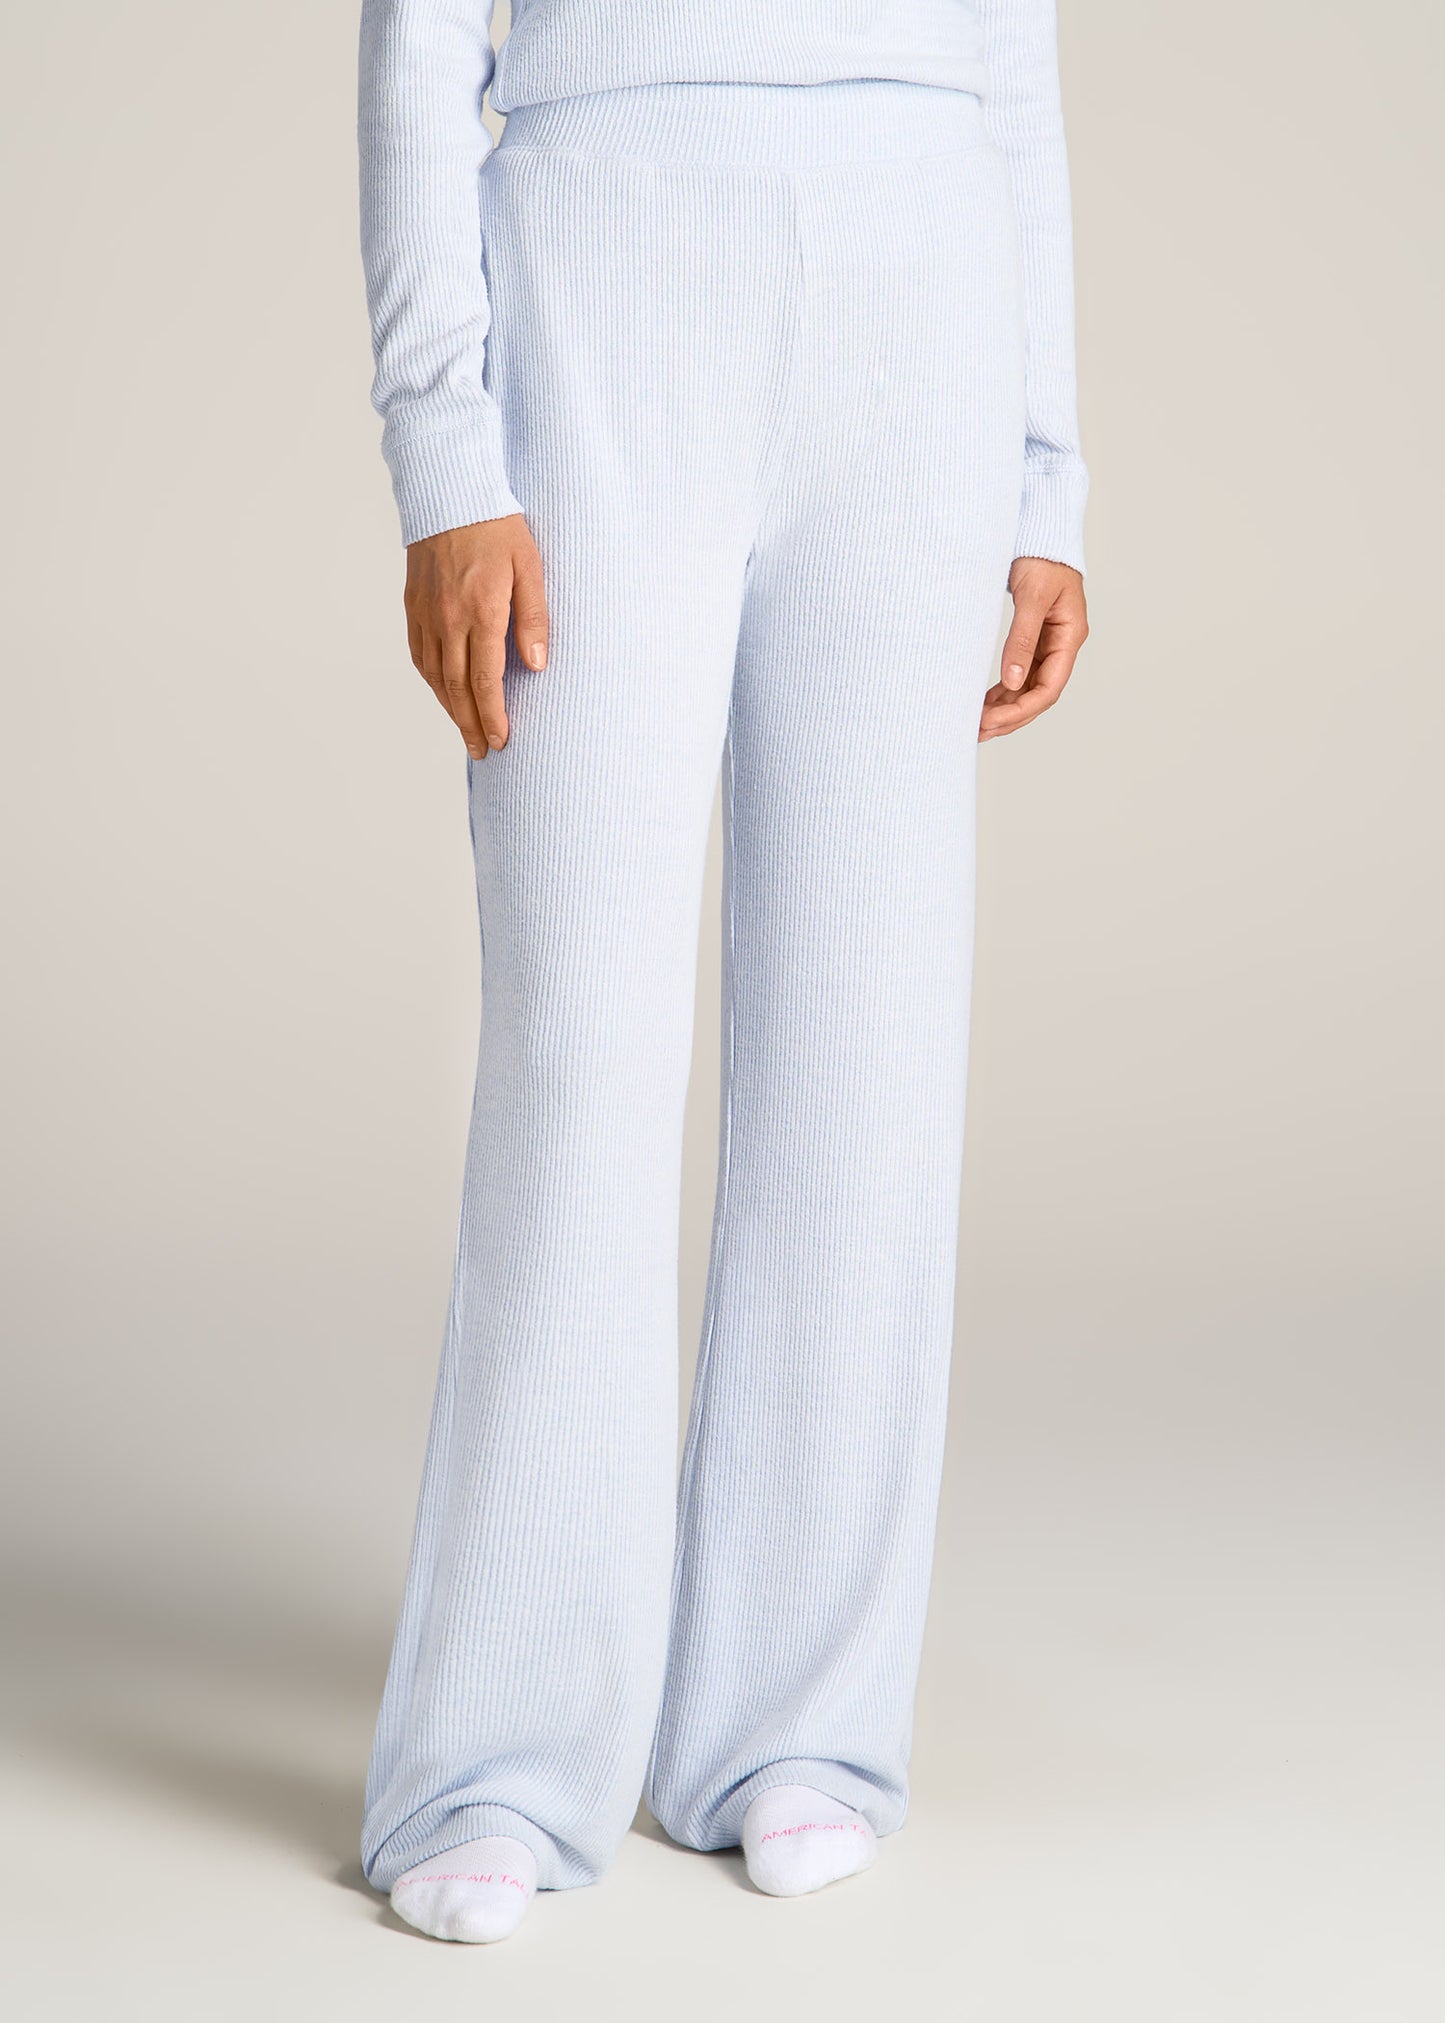 Women's Ribbed Flares